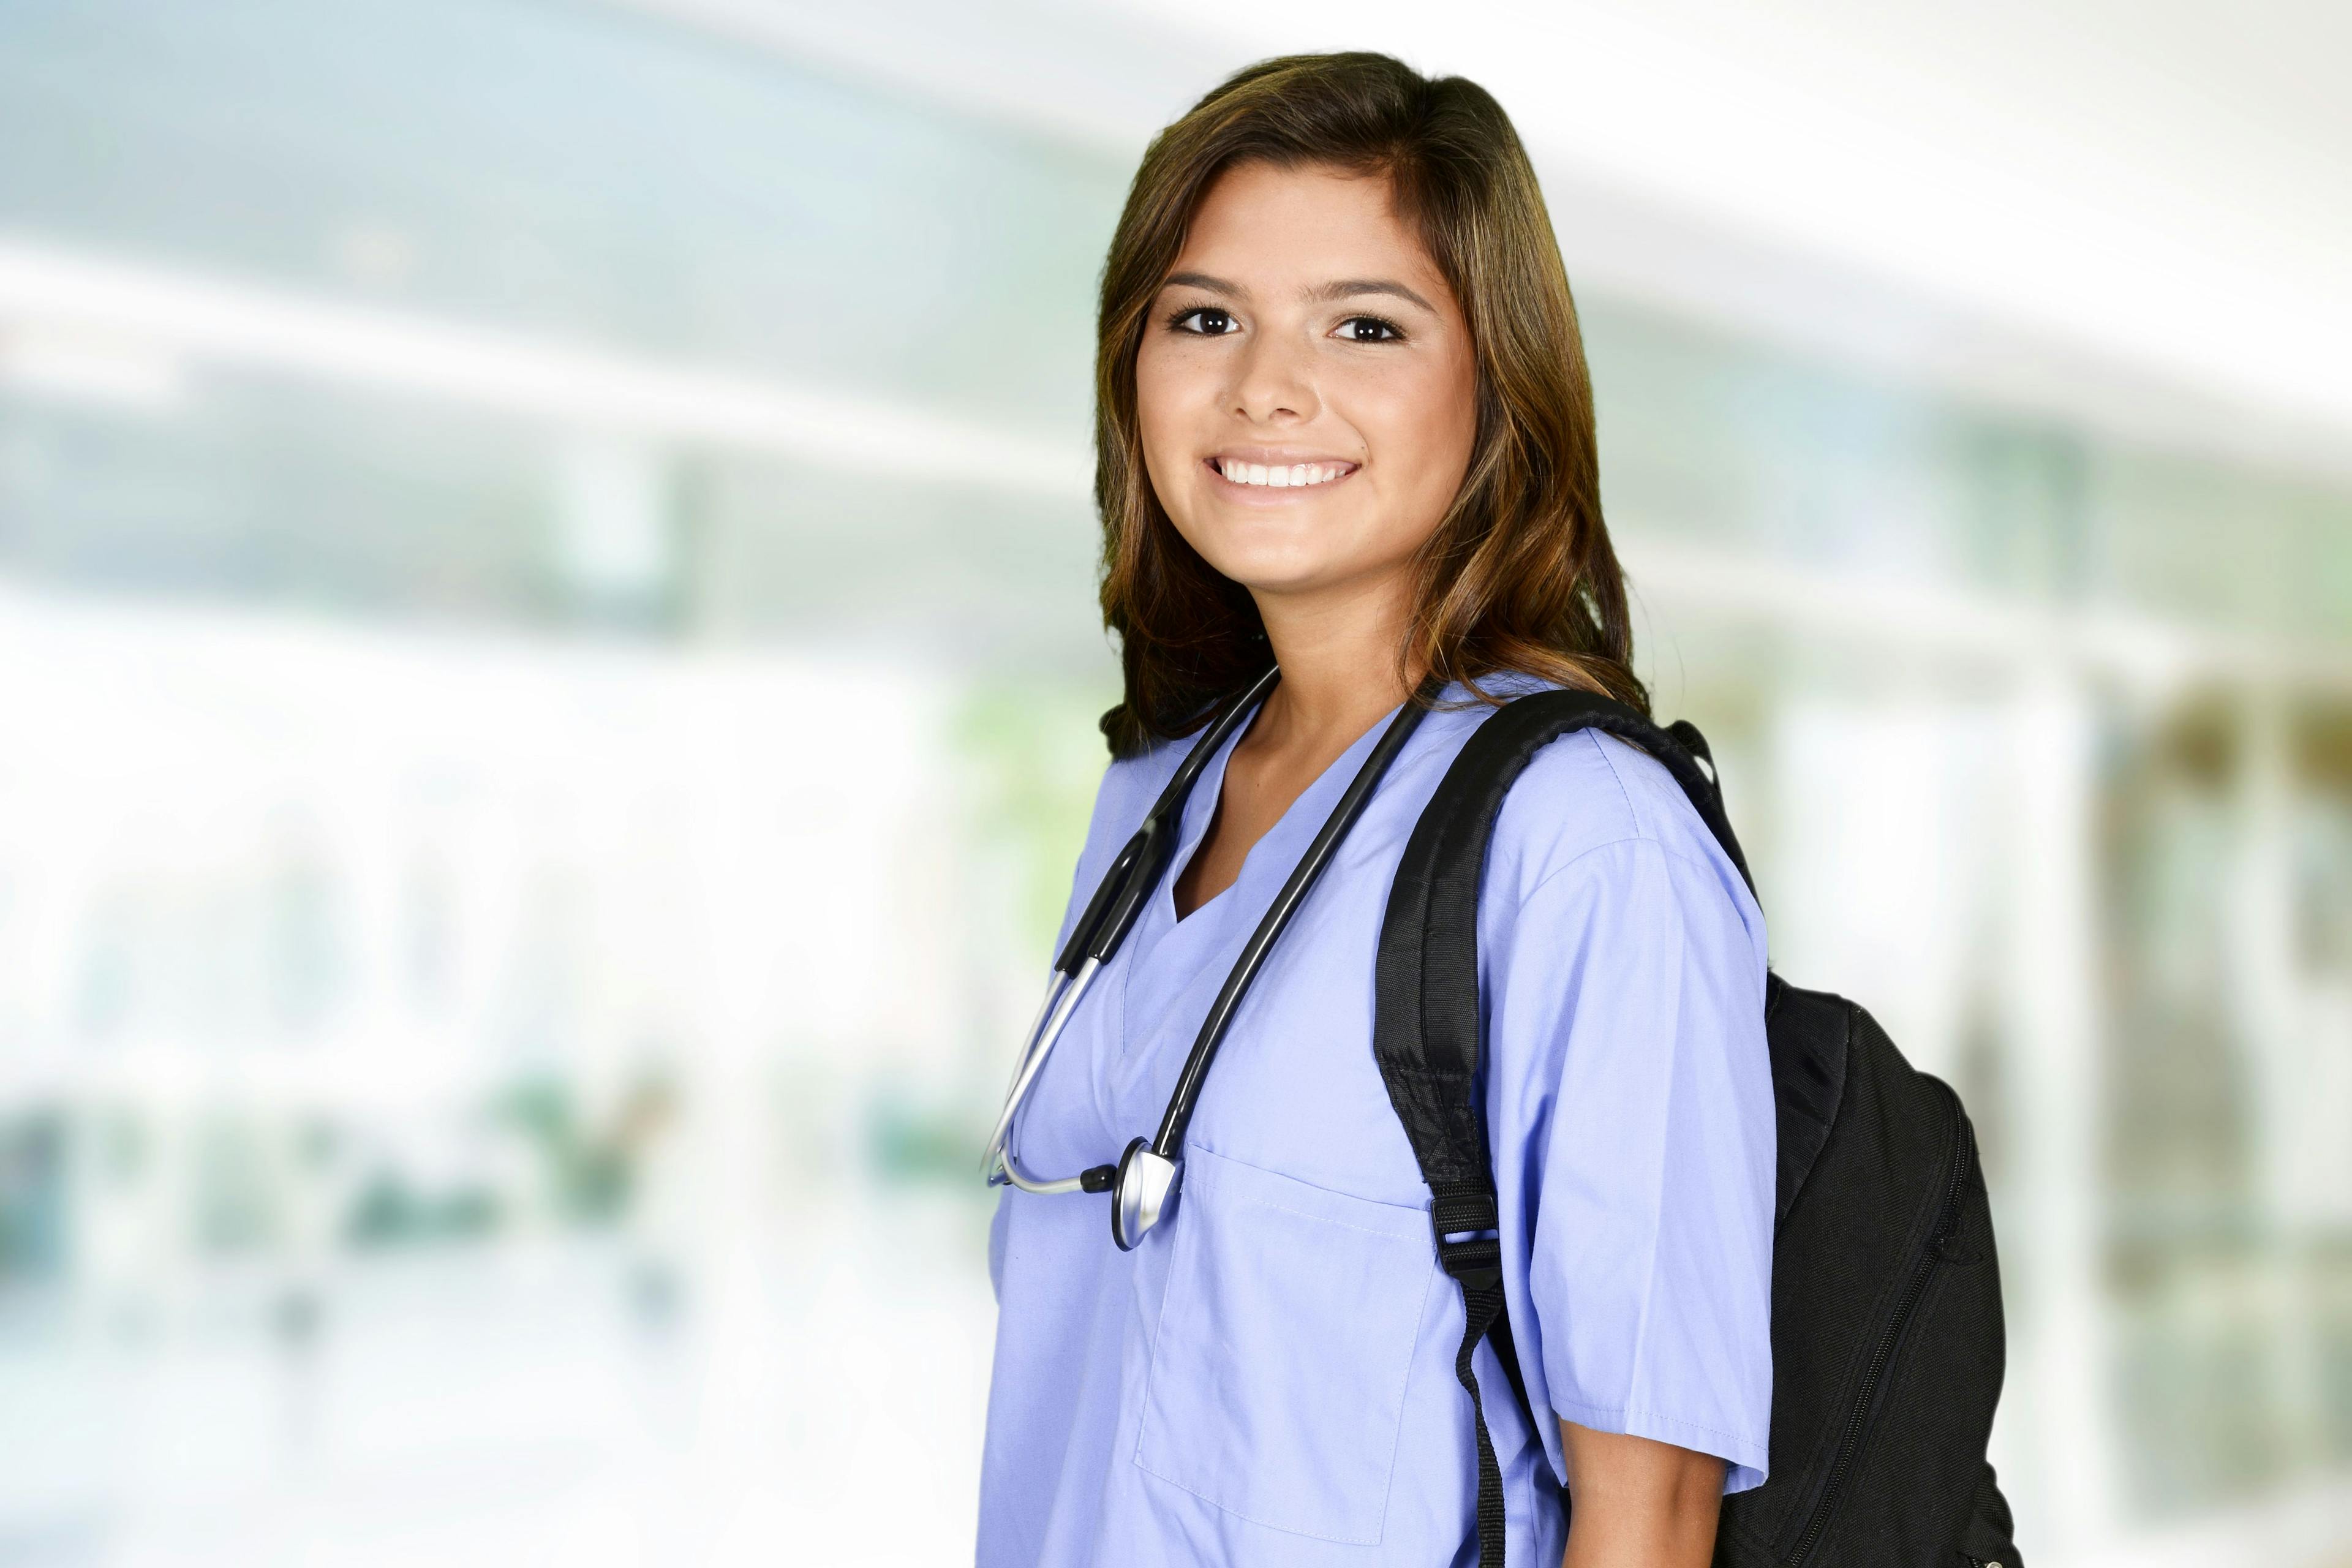 5 Tips for MSNs Looking to Become Nurse Practitioners